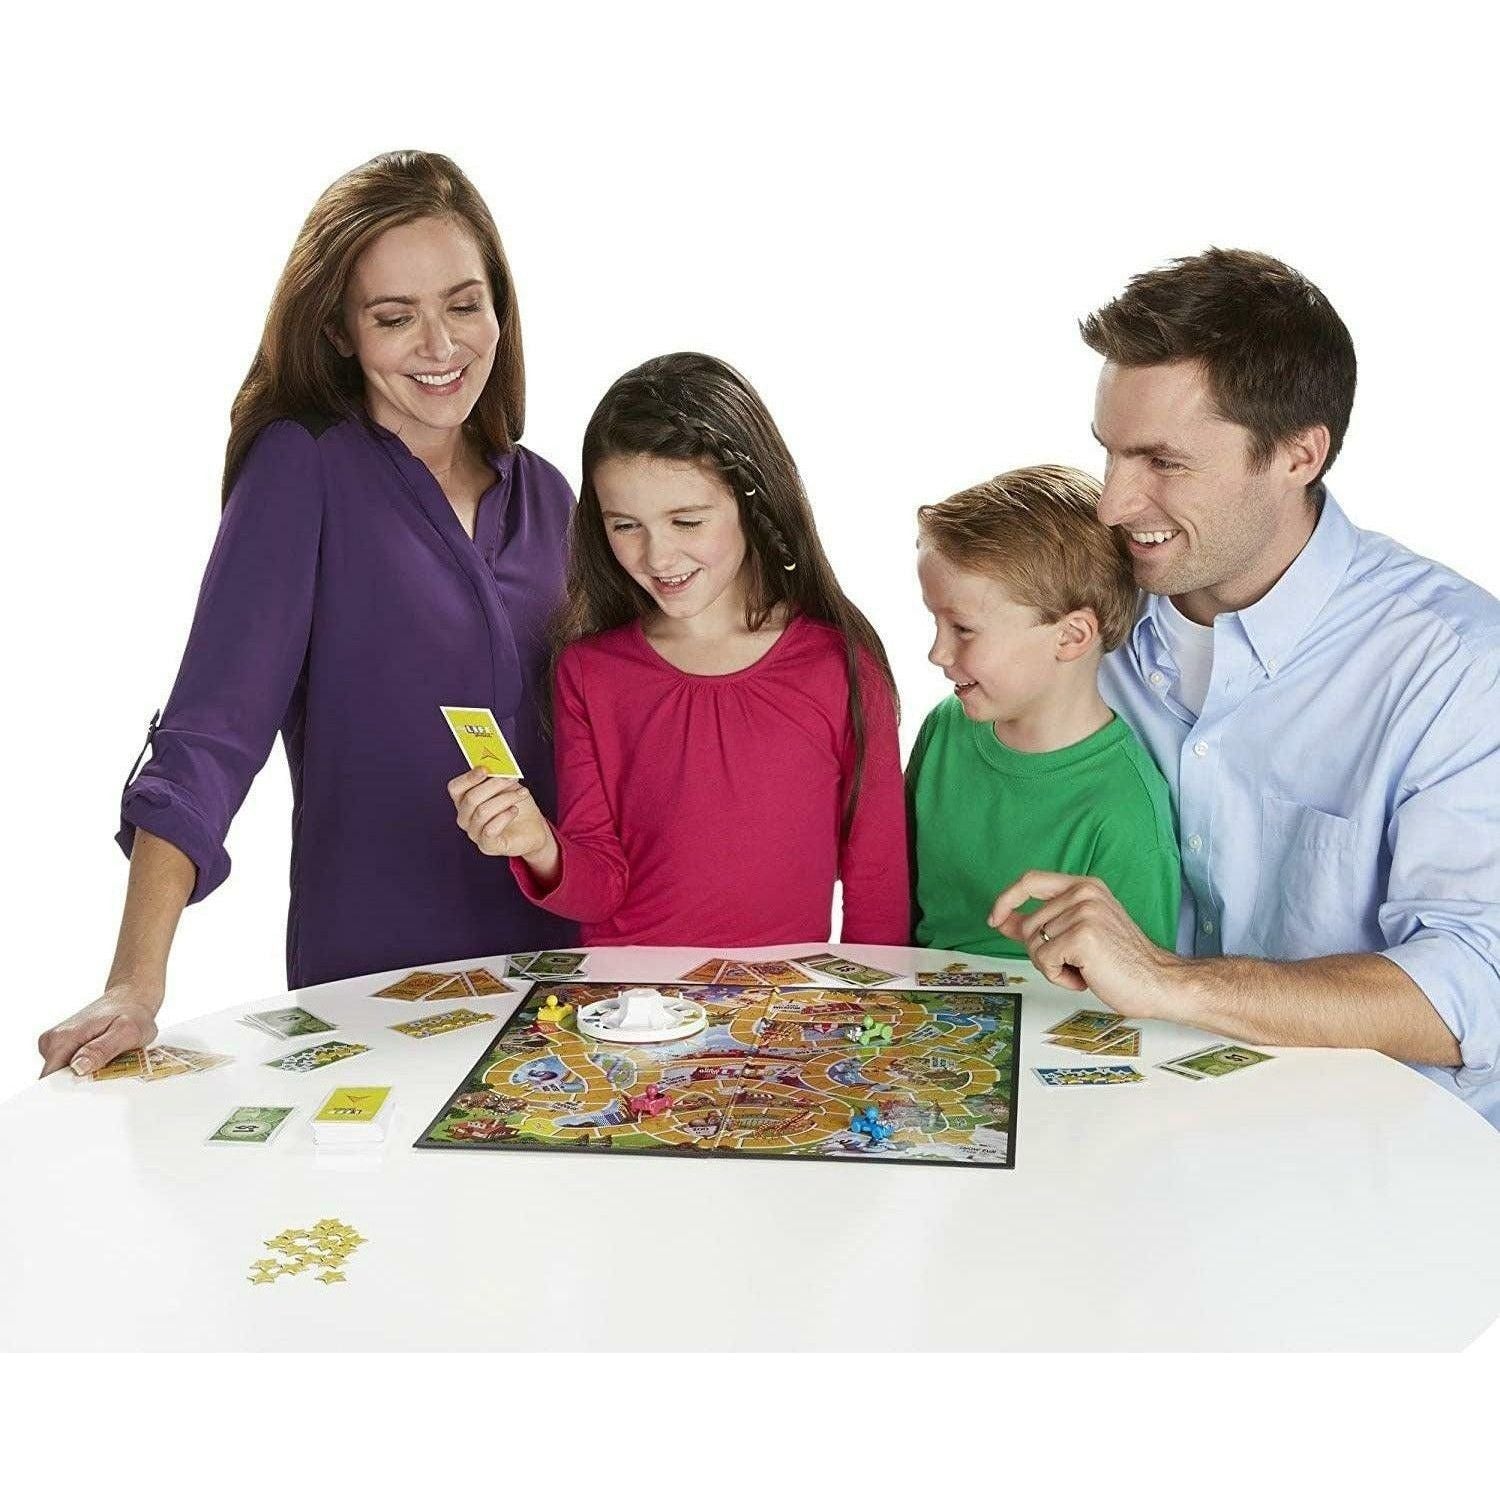 Hasbro The Game of Life Junior Board Game - BumbleToys - 8-13 Years, Boys, Card & Board Games, Girls, Monopoly, OXE, Pre-Order, Puzzle & Board & Card Games